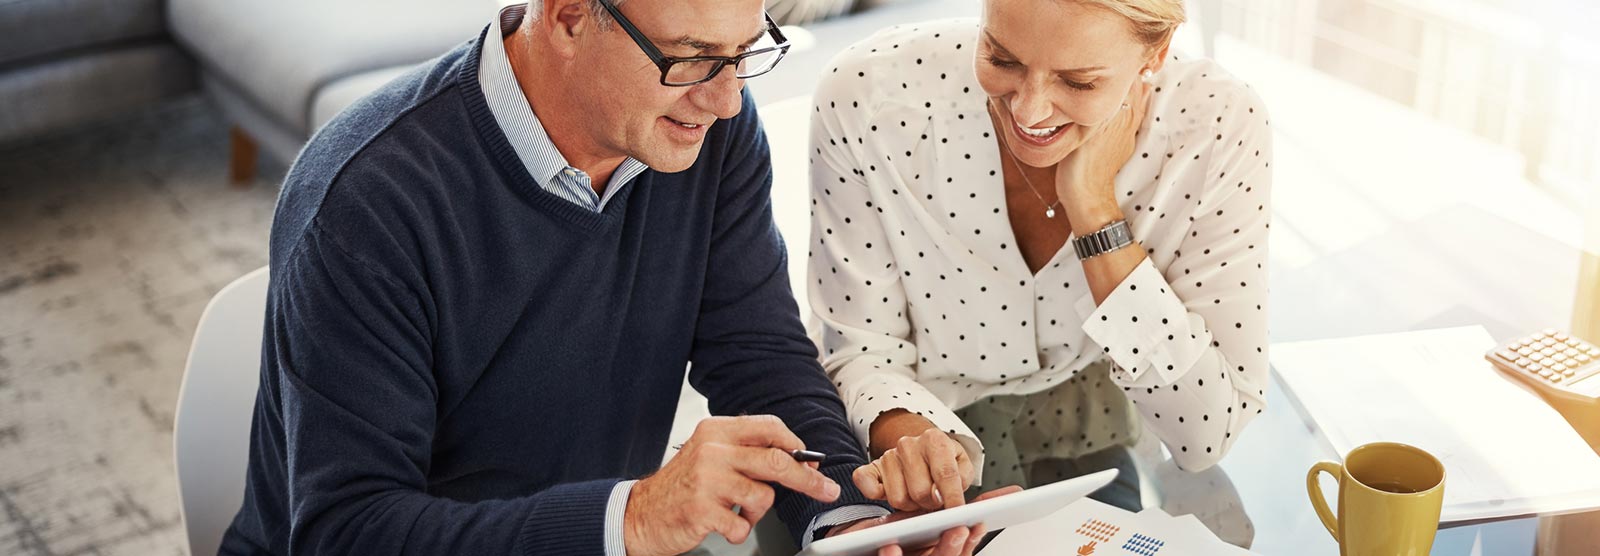 Couple looking at investments and finances on a smart tablet